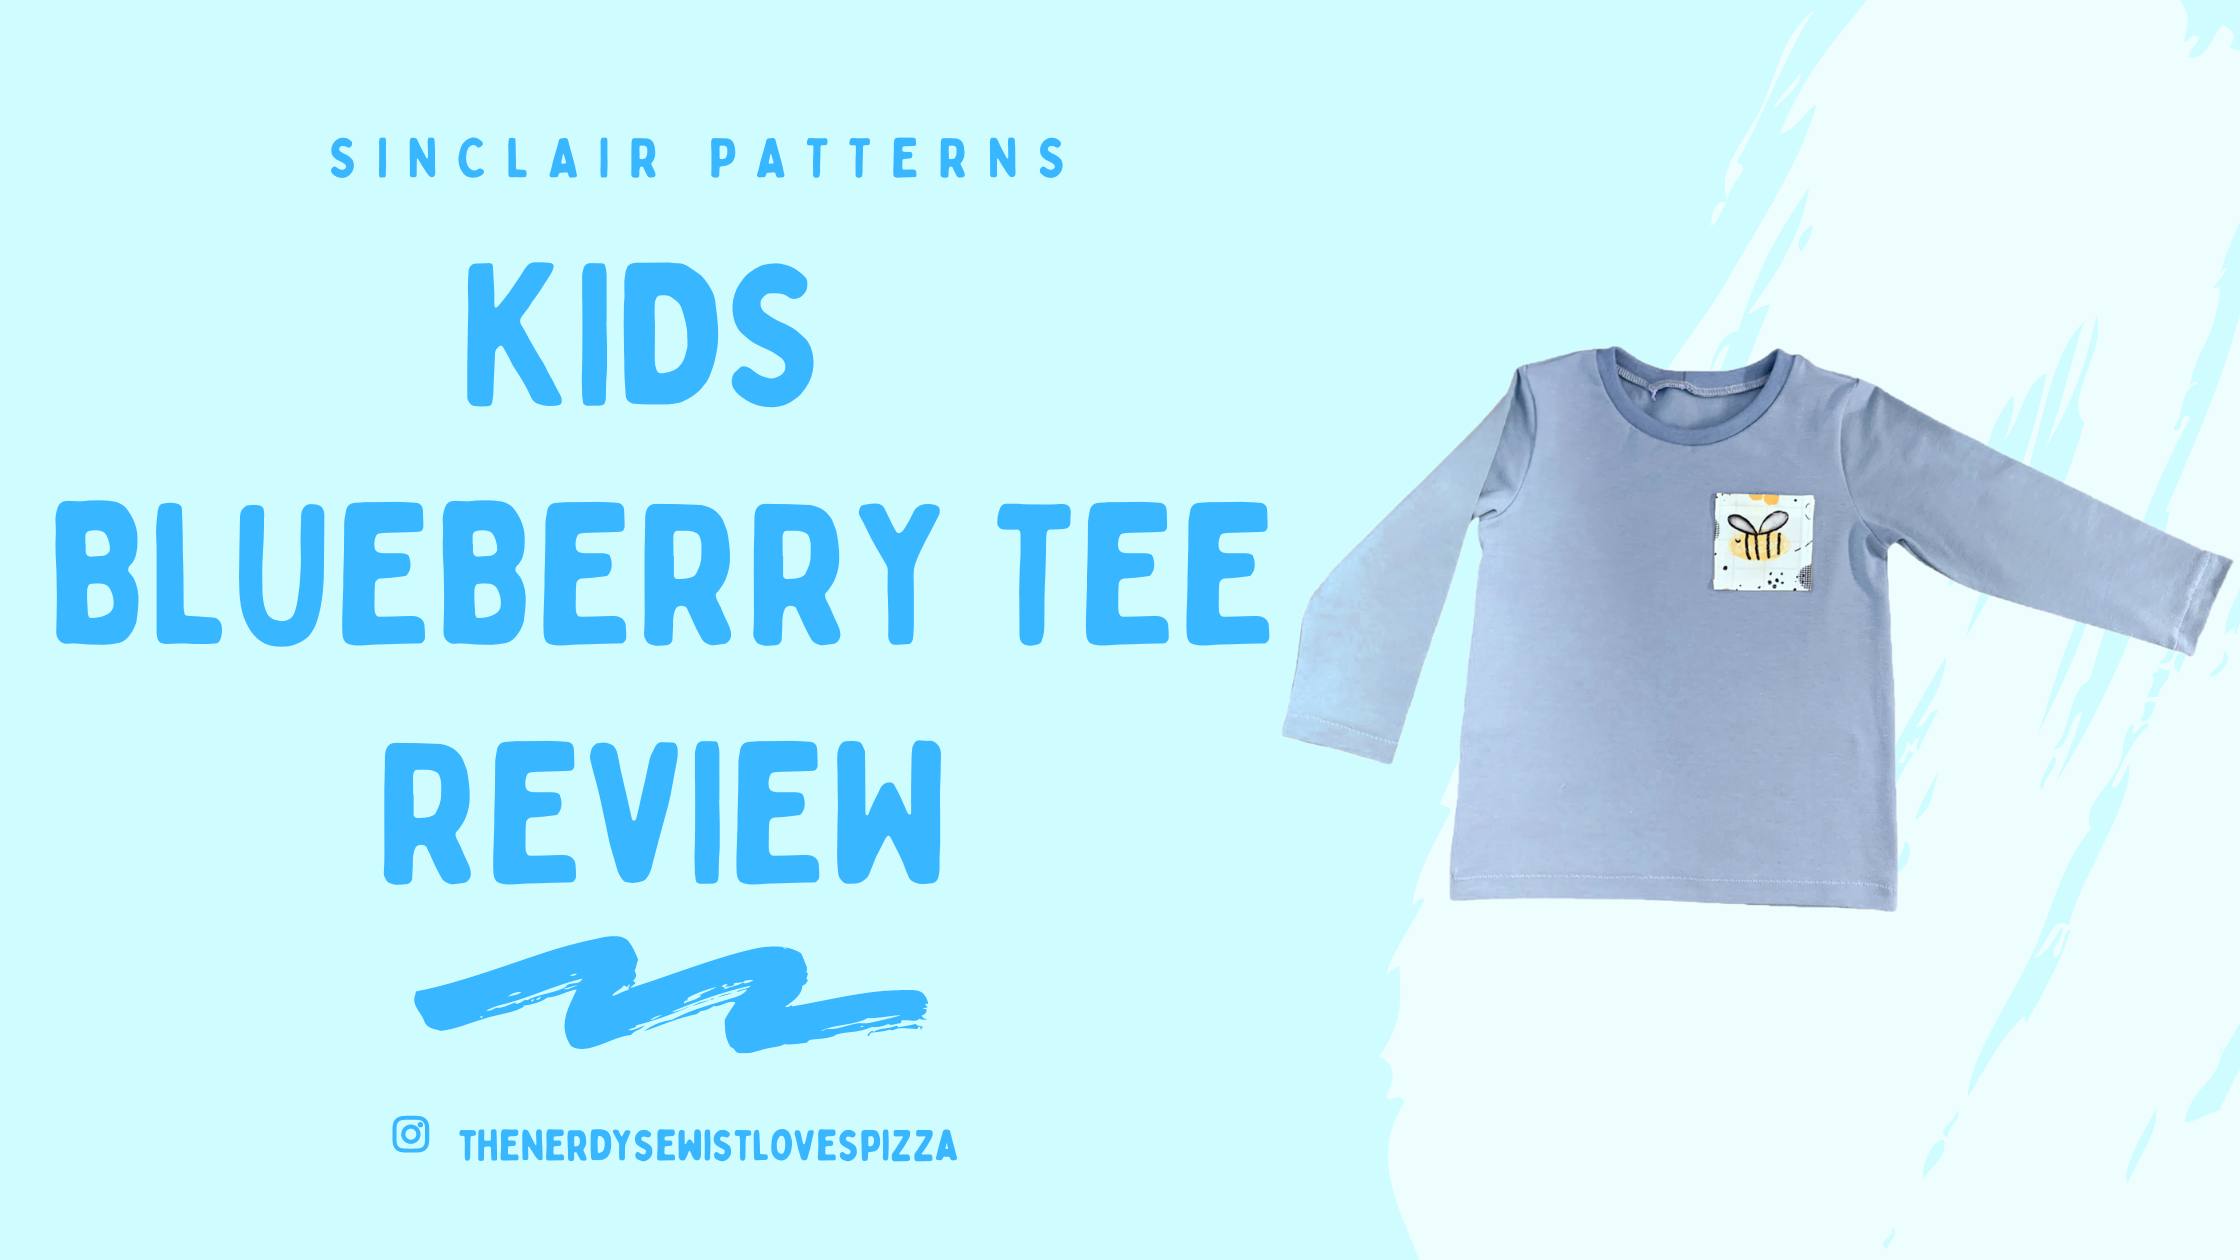 Sinclair Patterns - Kids Blueberry Tee Review - The Nerdy Sewist